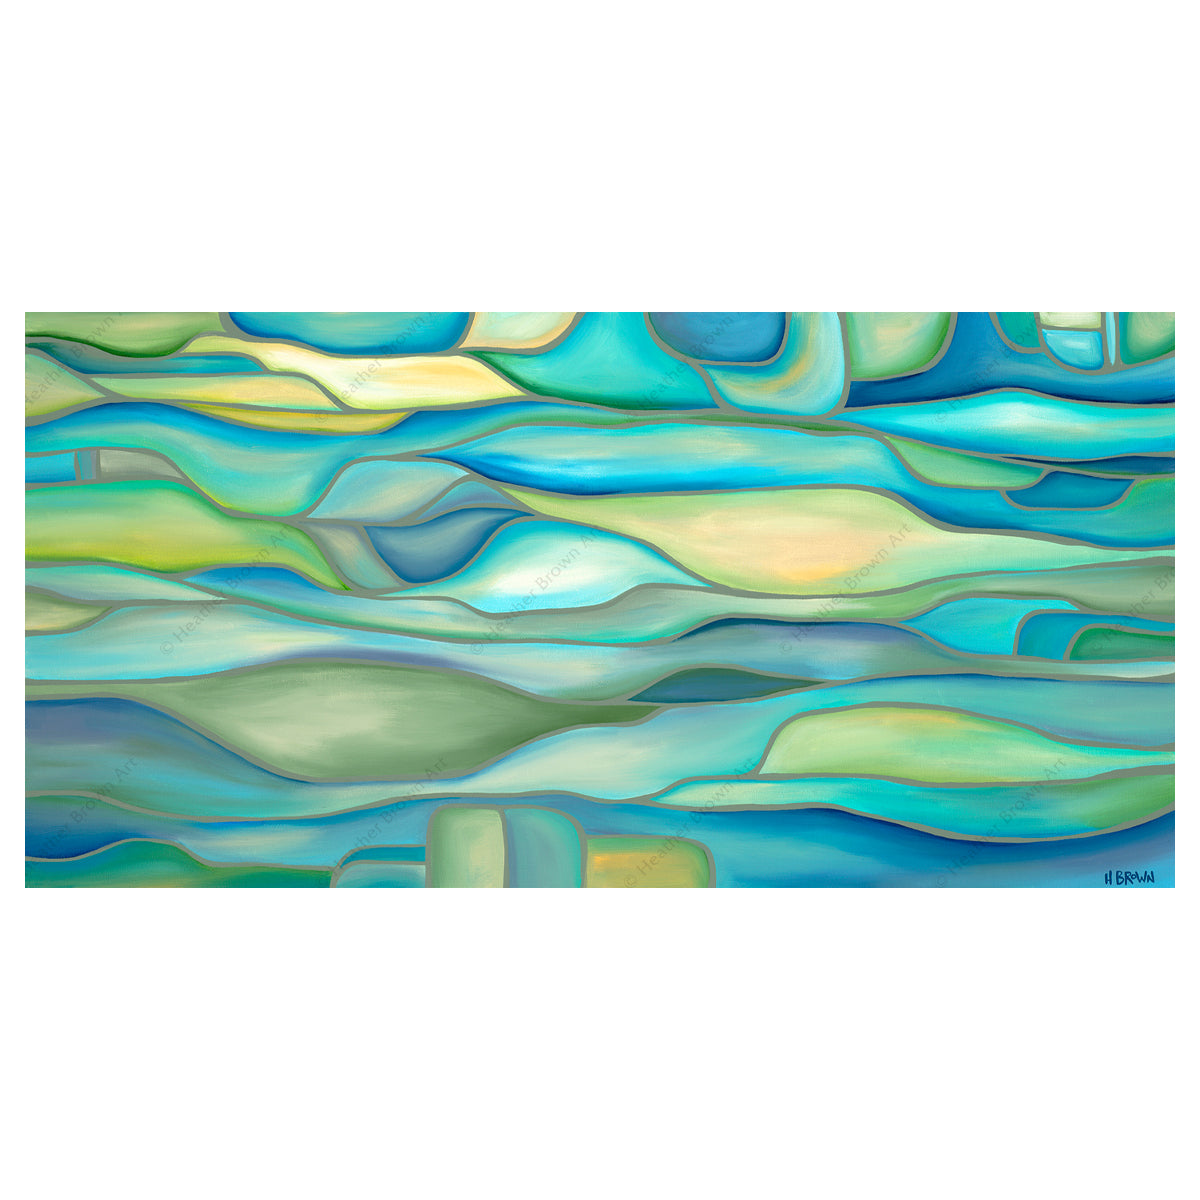 heather brown water leaf abstract art canvas